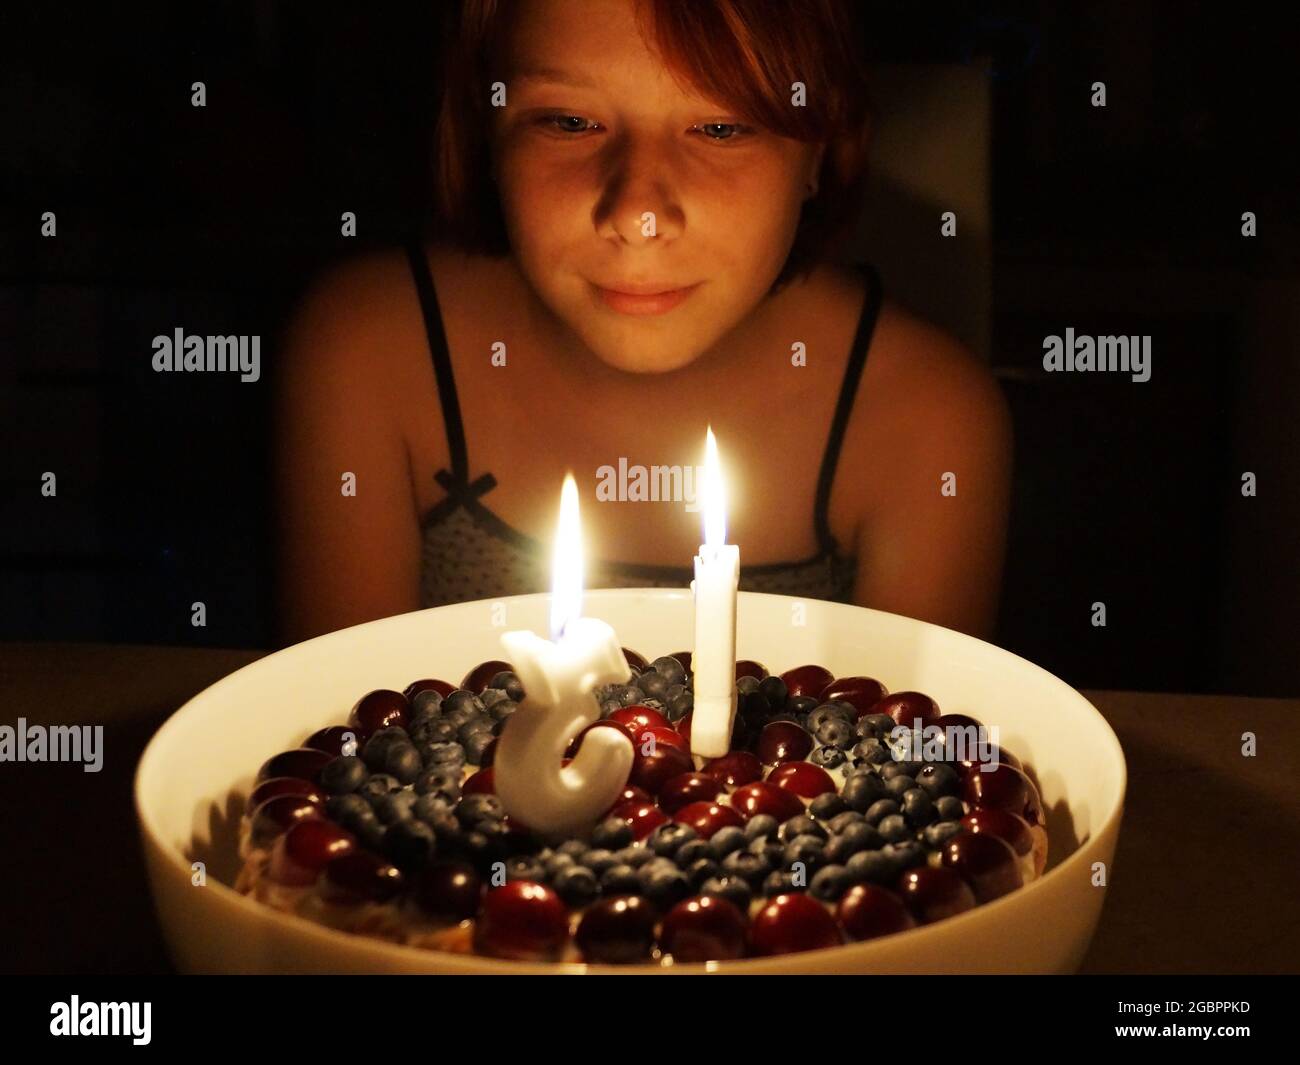 teenage girl pensively looks at burning candles 13 on a birthday cake in a dark room. Stock Photo